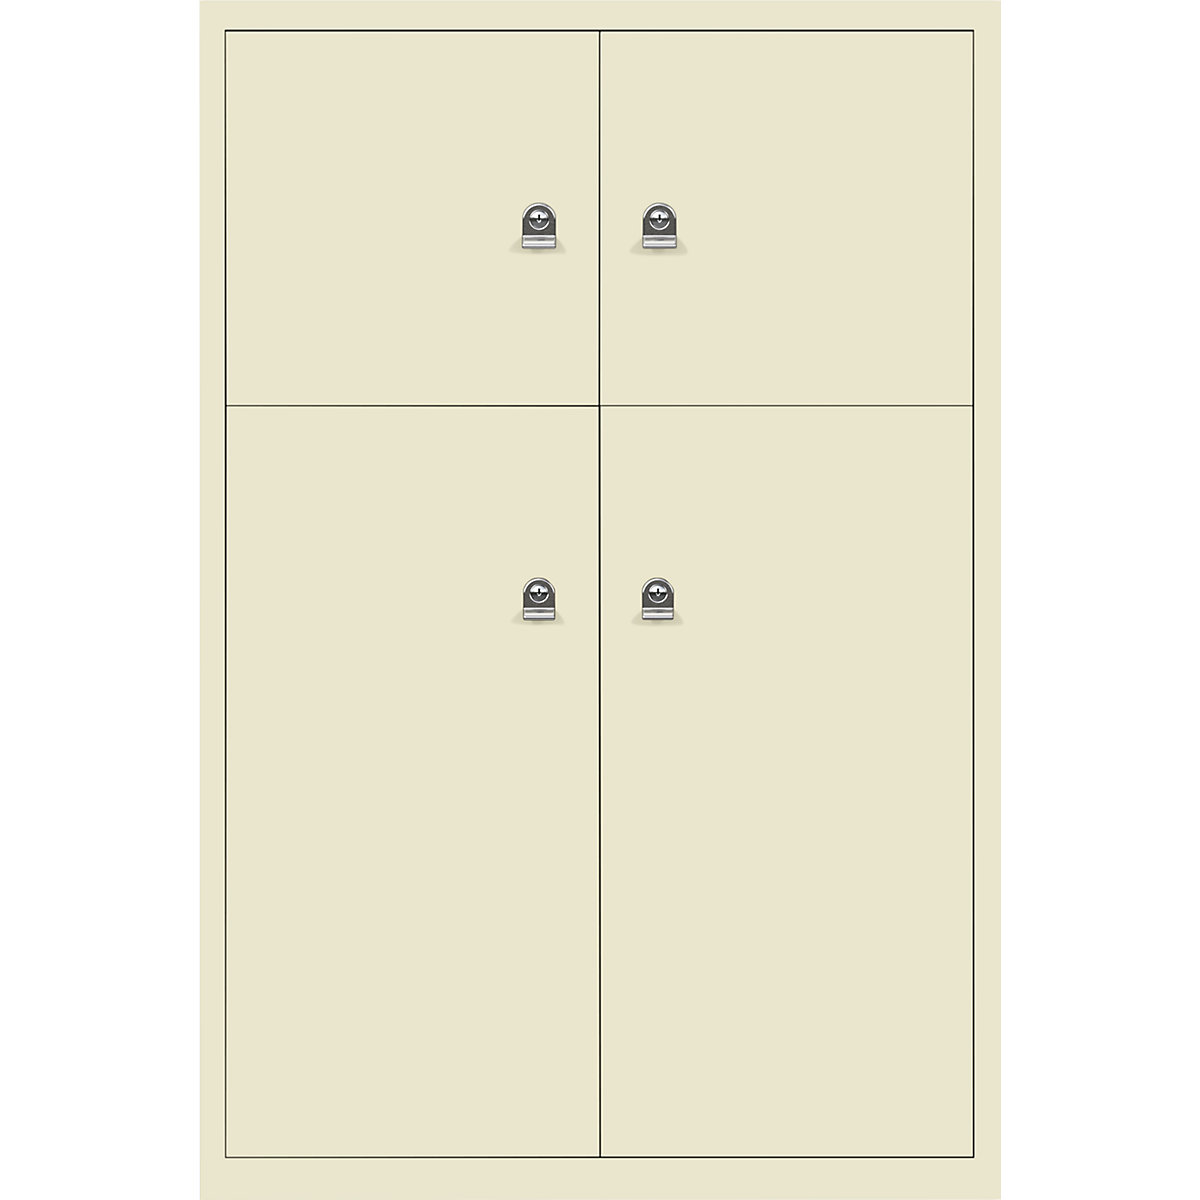 BISLEY – LateralFile™ lodge, with 4 lockable compartments, height 2 x 375 mm, 2 x 755 mm, light ivory